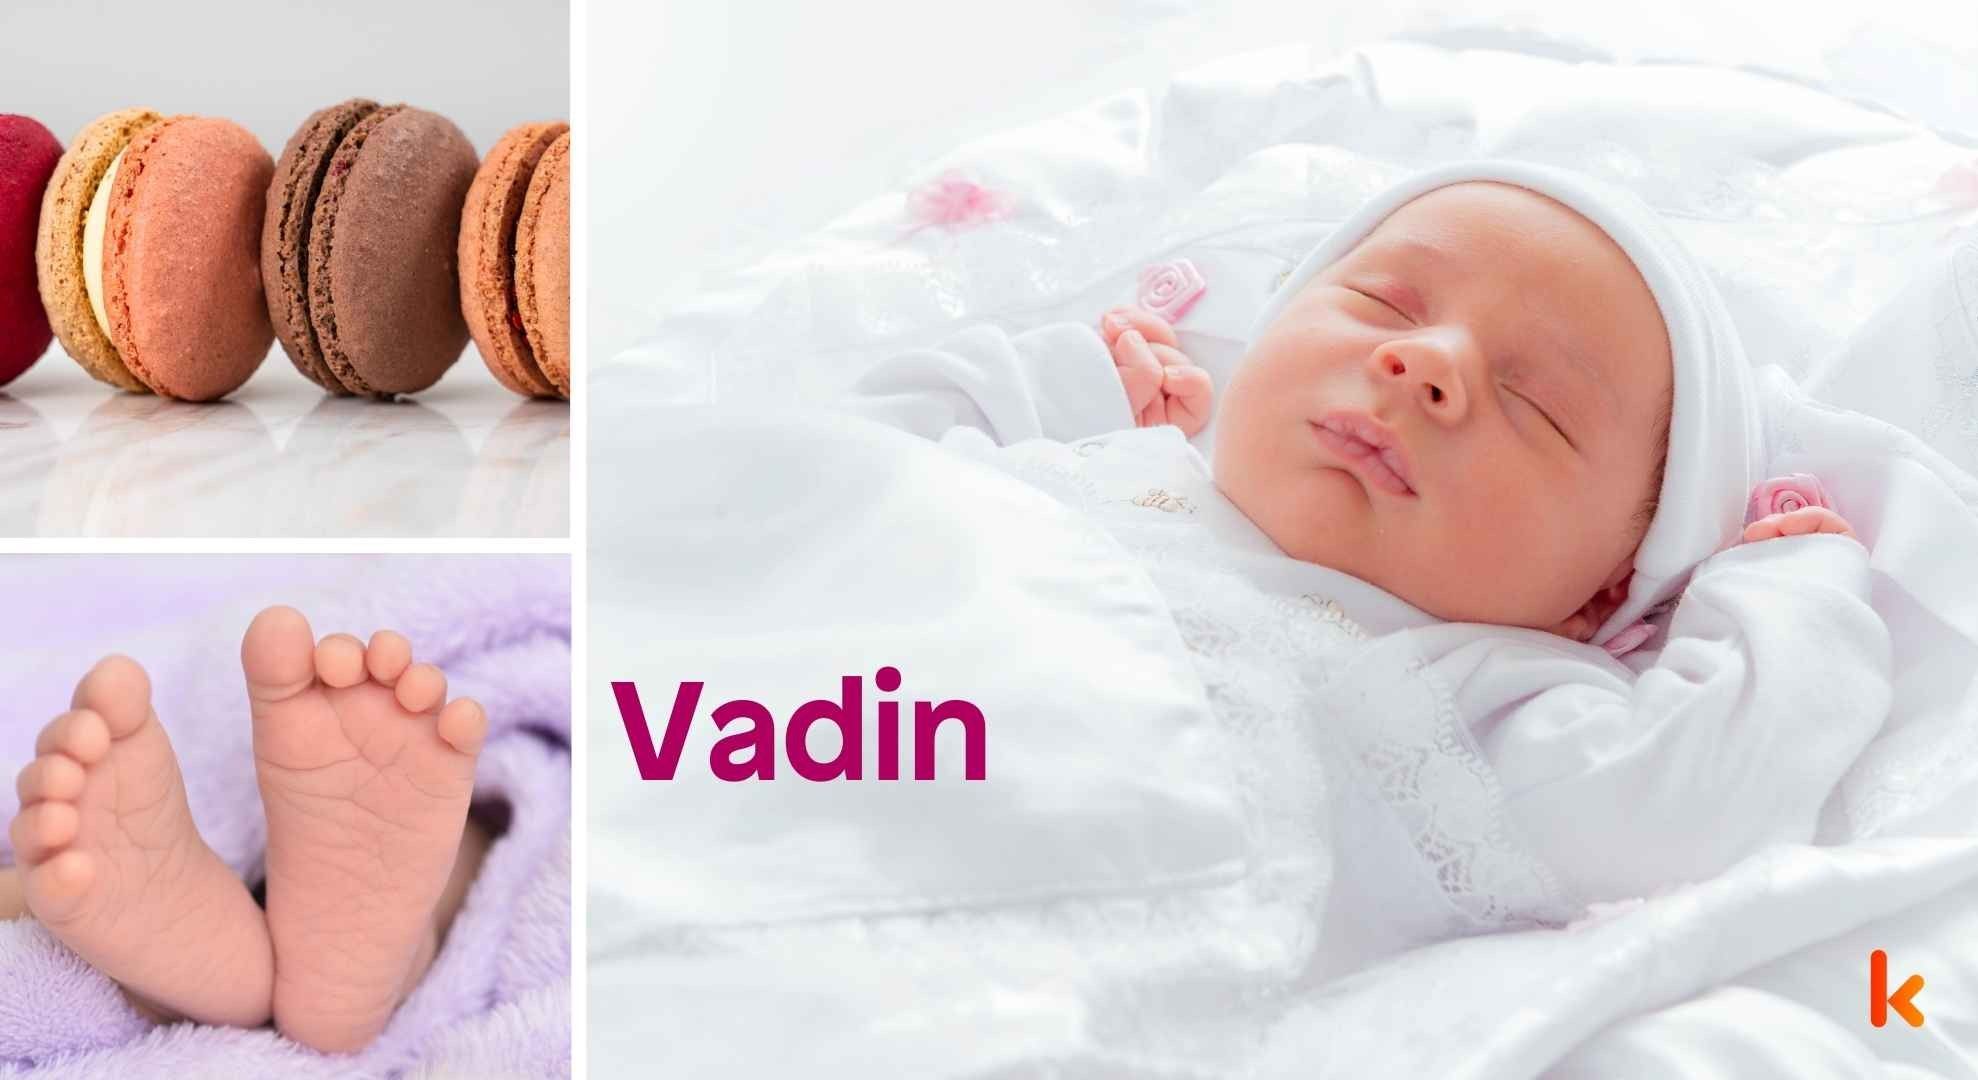 Meaning of the name Vadin